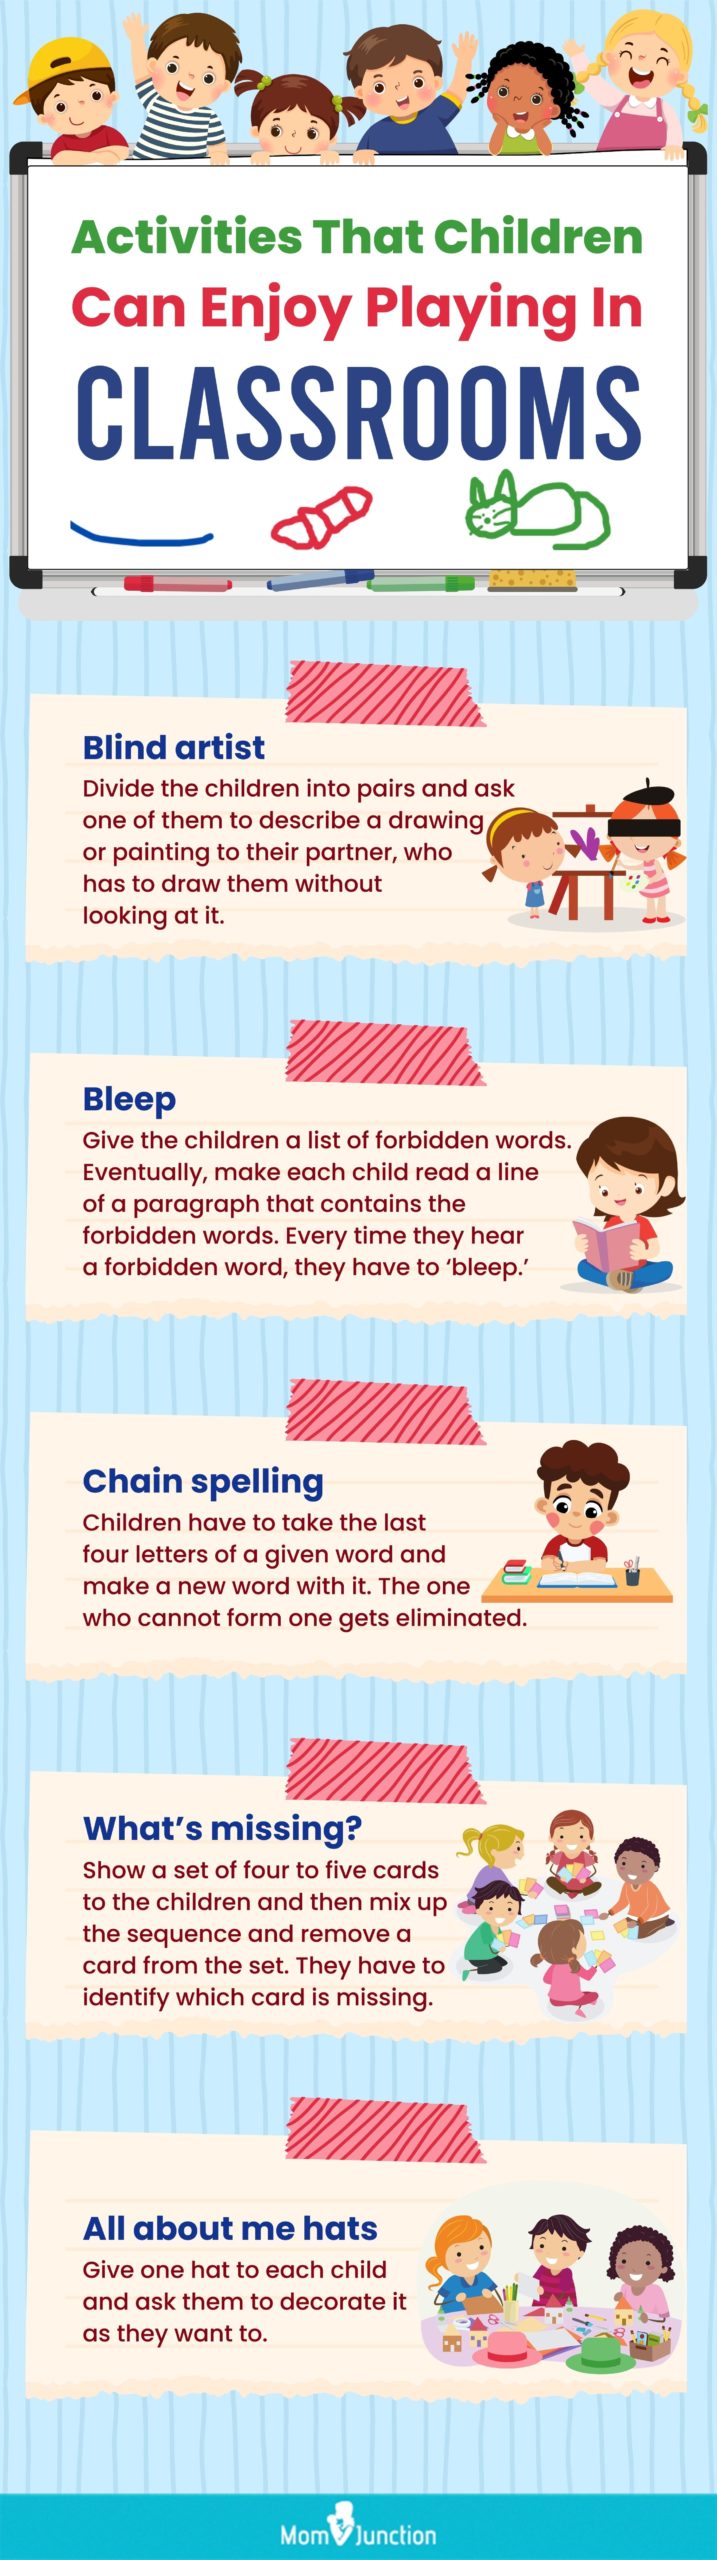 activities that children can enjoy playing in classrooms (infographic)